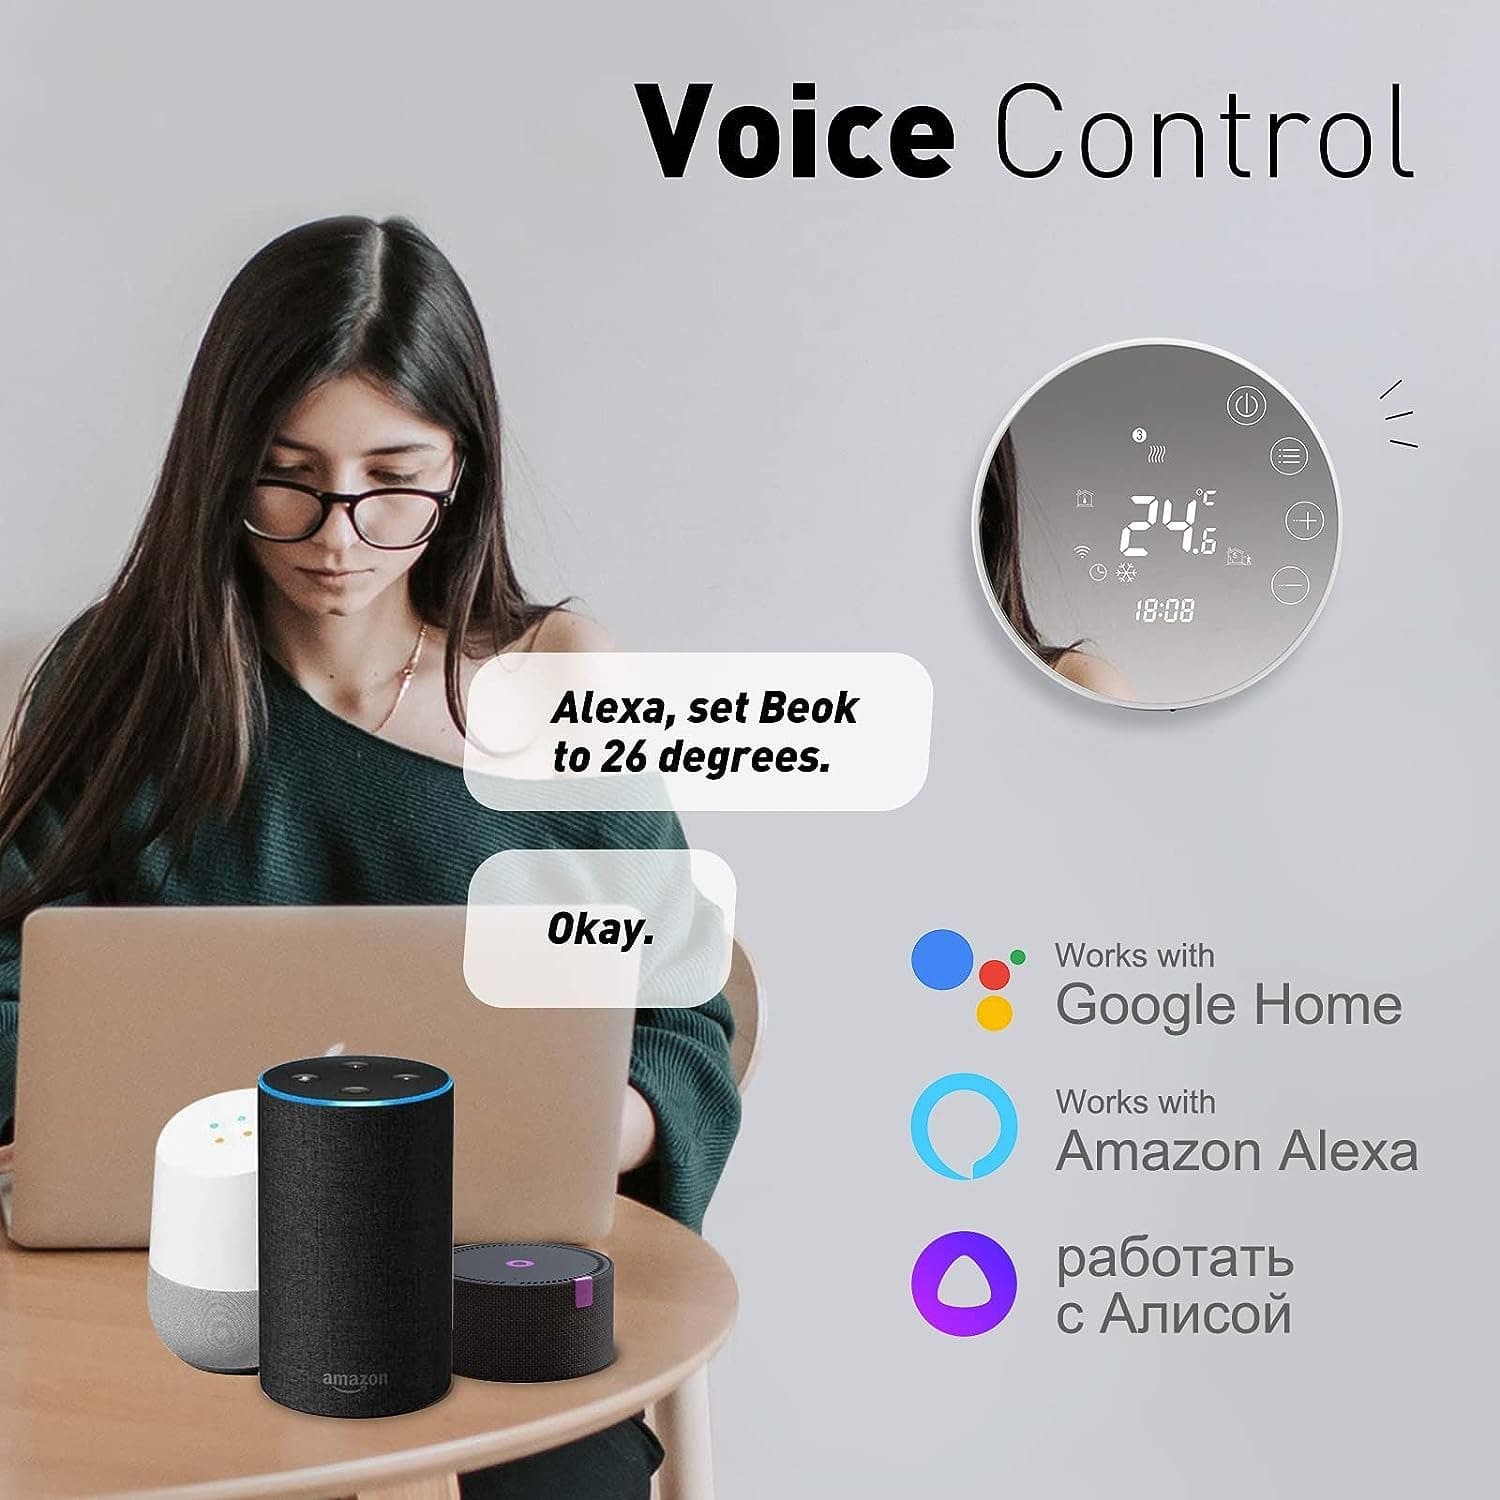 Can I Use Voice Commands To Make Phone Calls Through My Smart Home System?